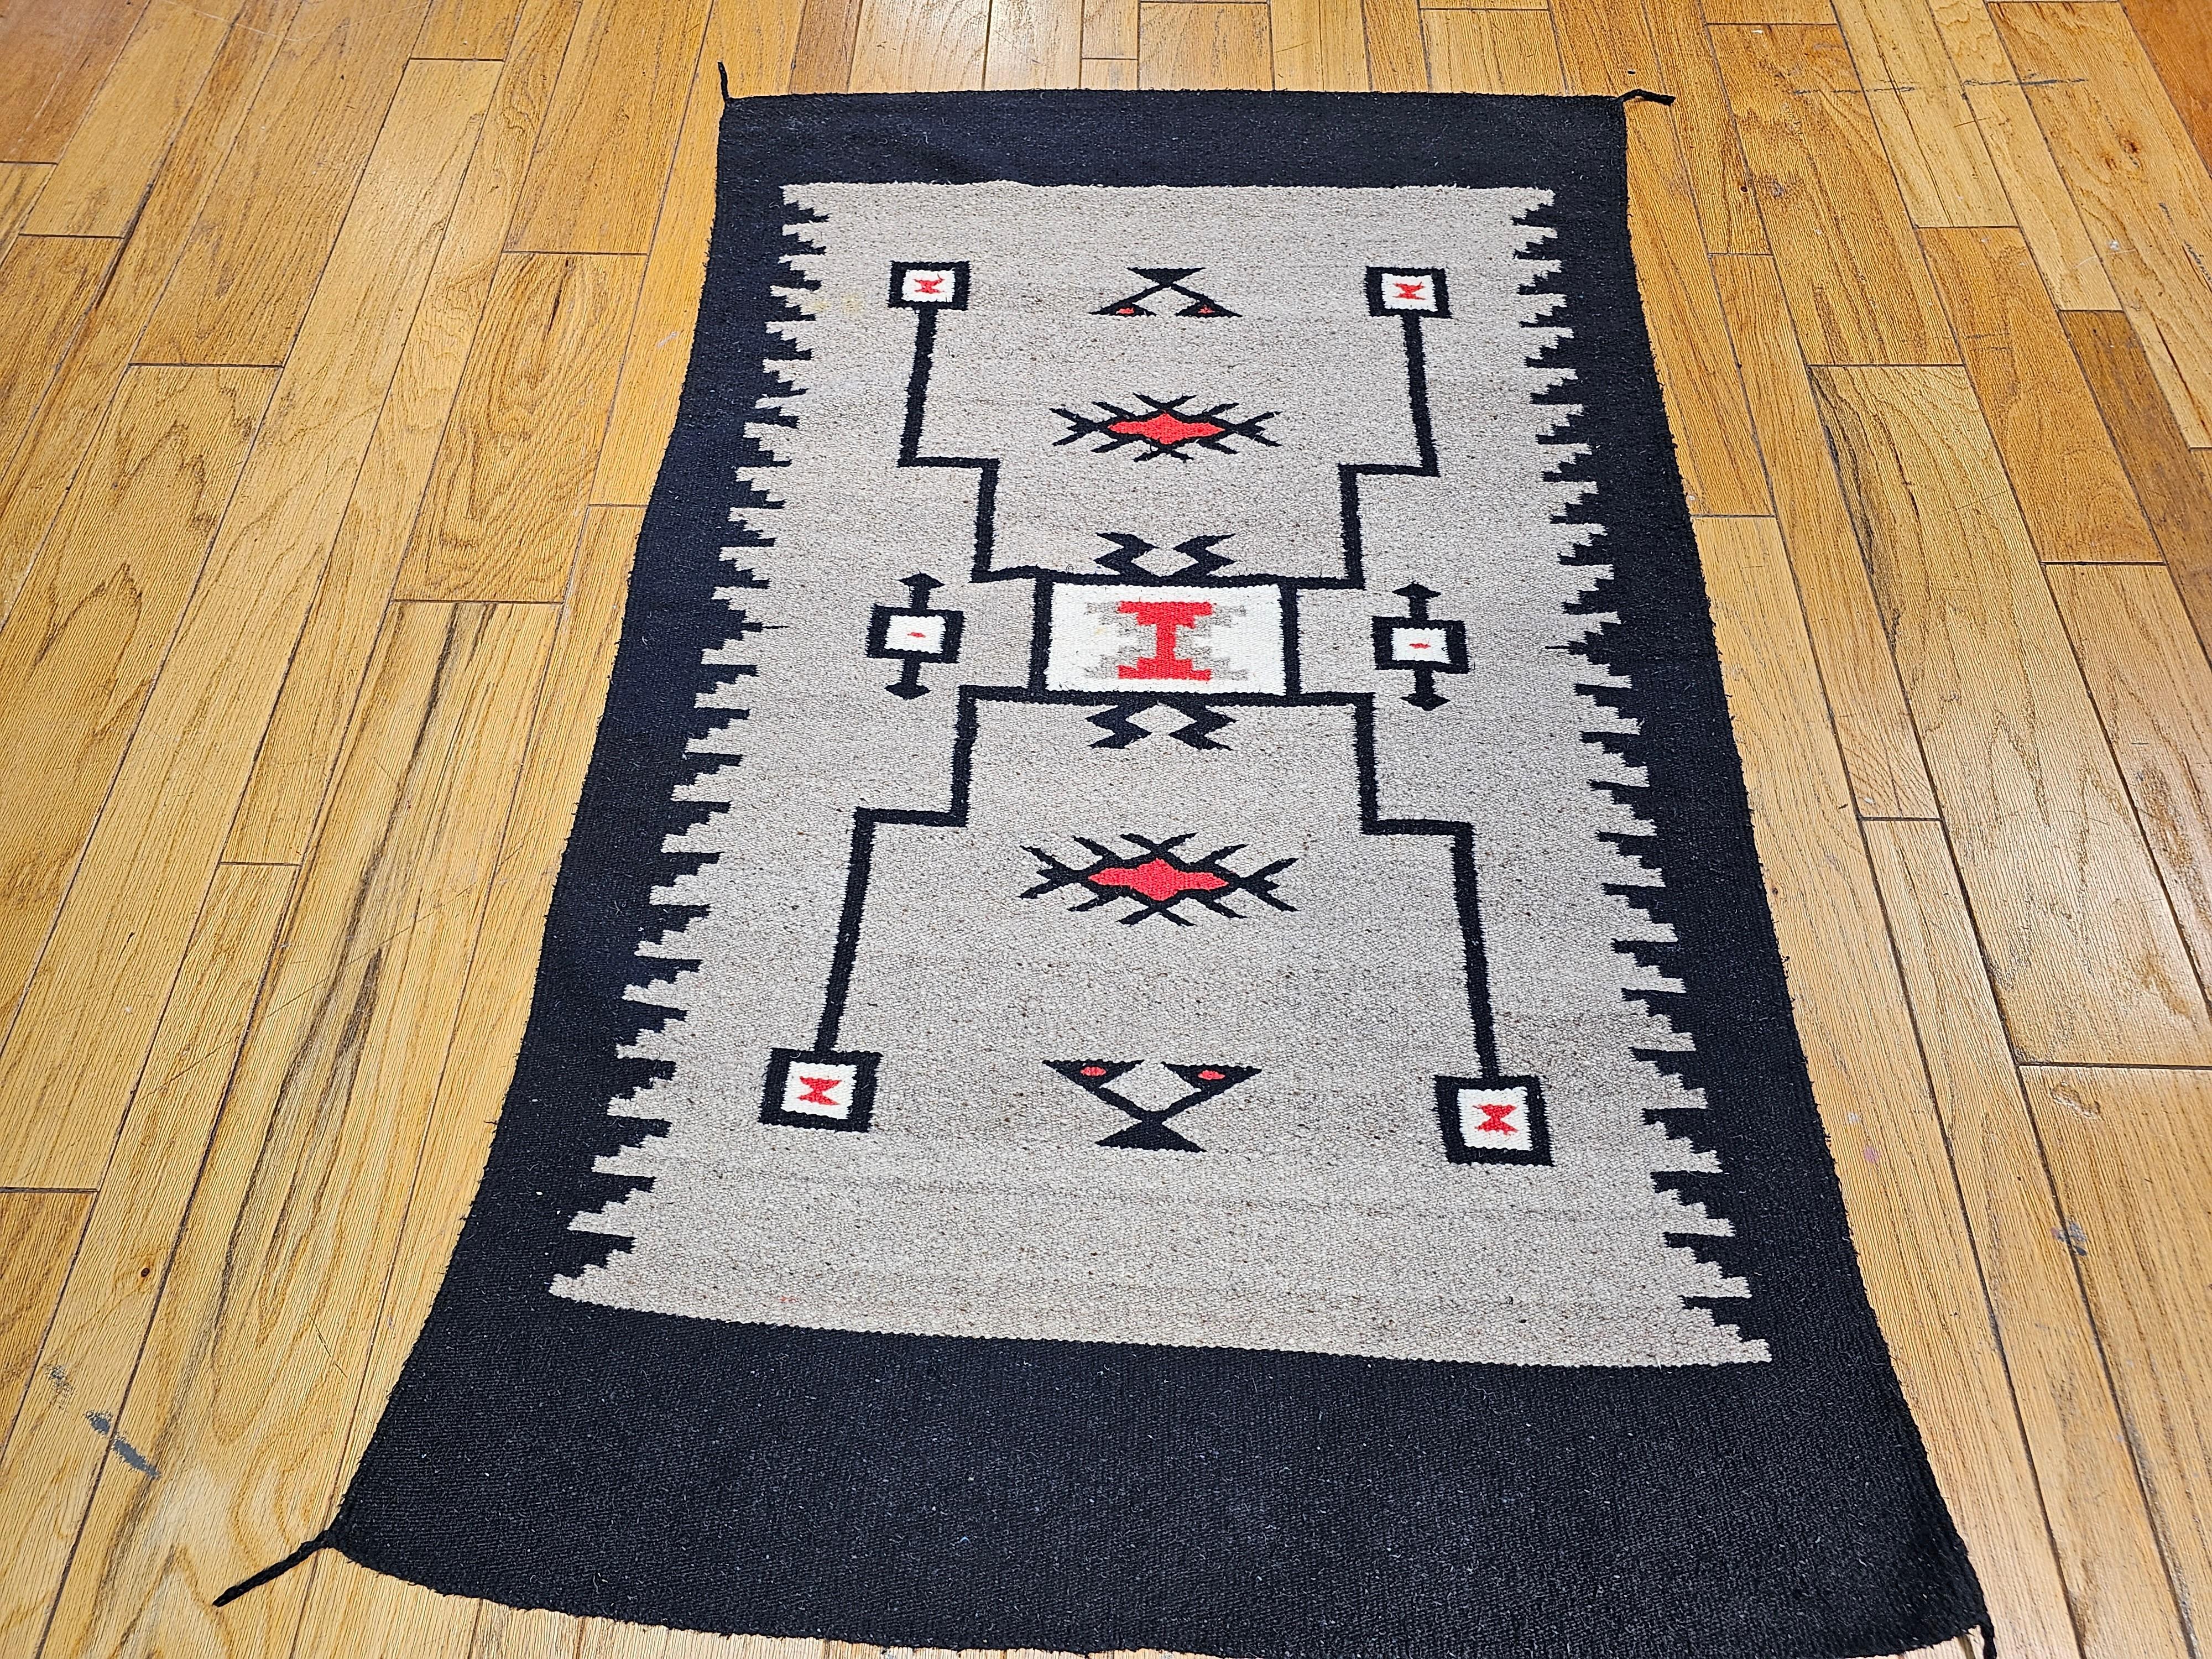 Vintage Native American Navajo rug in a Storm Warrior pattern in gray, Ivory, red, and black handwoven in the SW United States. Circa the 1920-1930. This rug has a very unique and wonderful color combination including gray, black and ivory. The rug